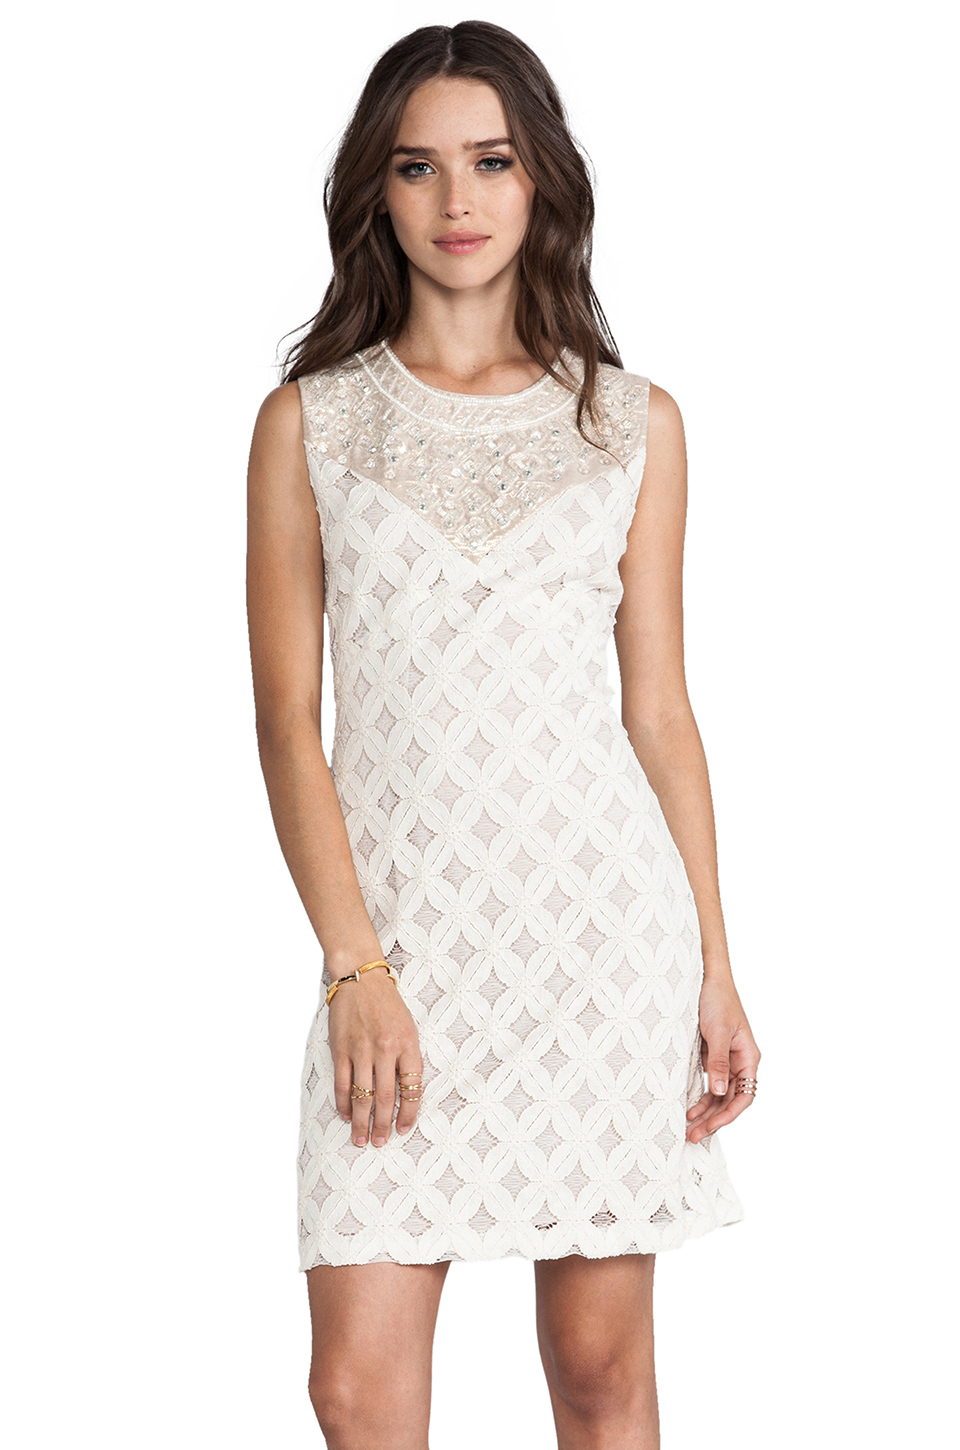 Lyst - Anna Sui Runway Lace with Diamond Beading Tank Dress in Cream in ...